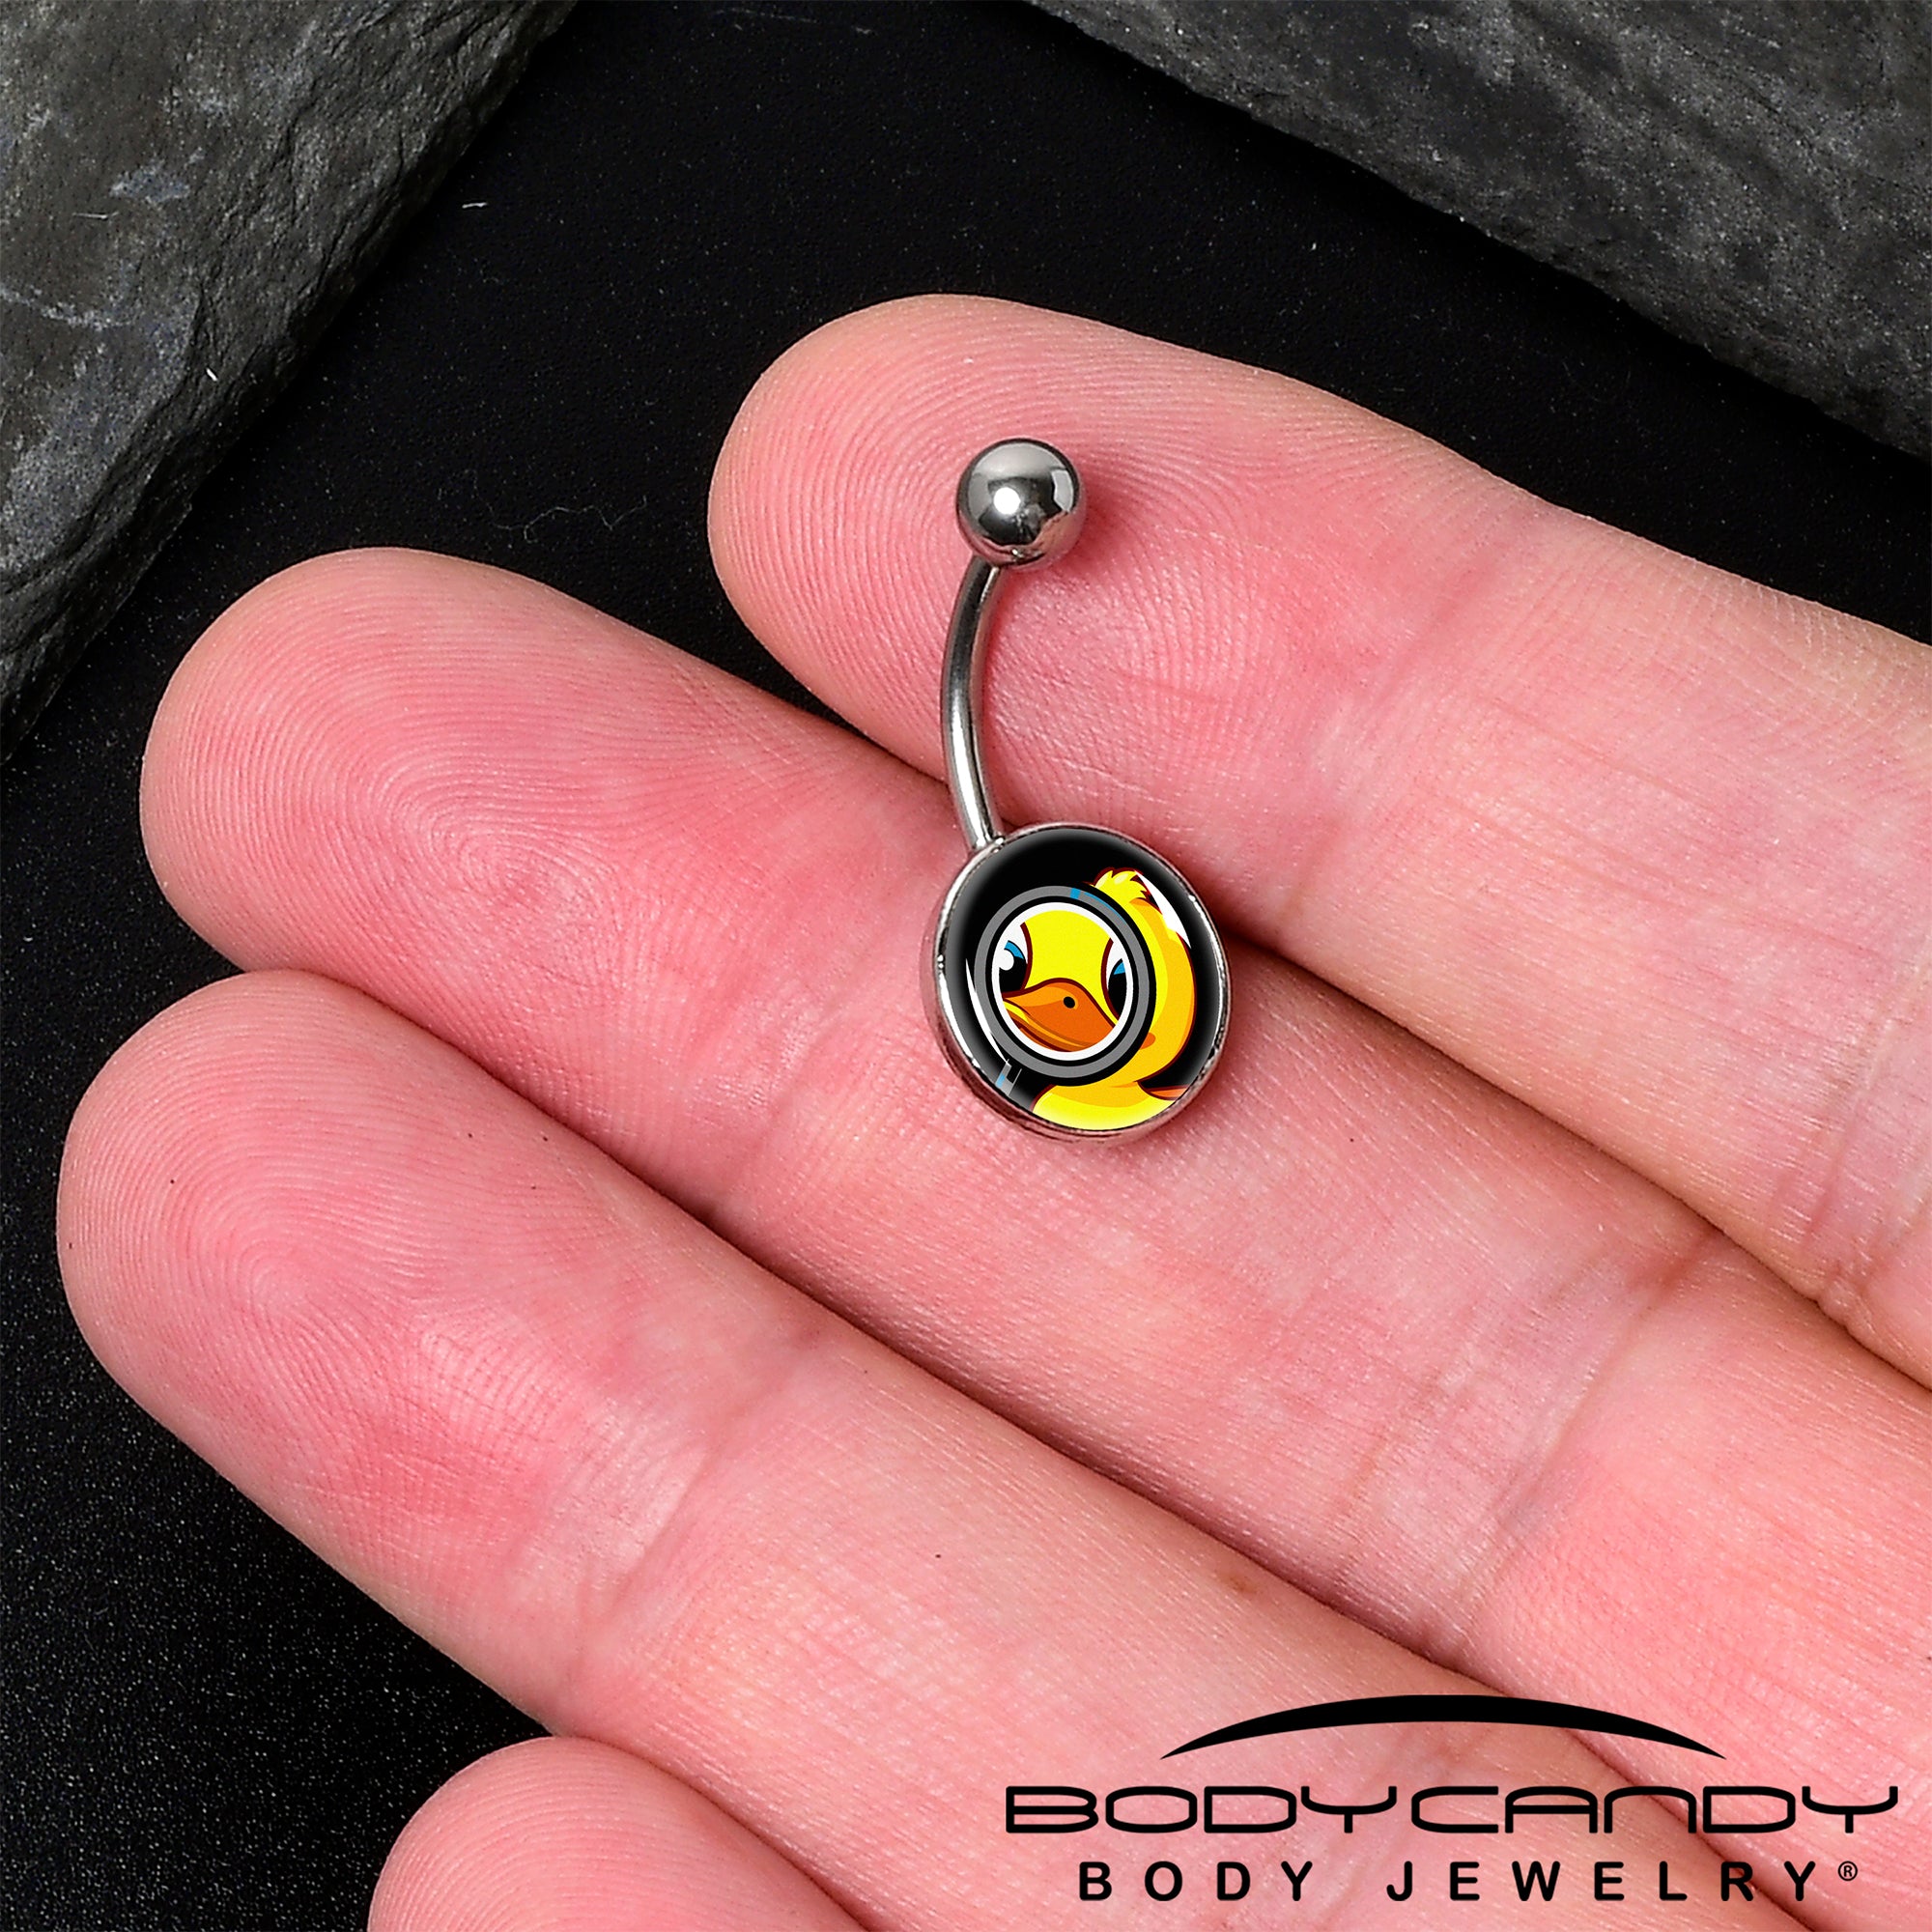 Magnified Yellow Duck Belly Ring